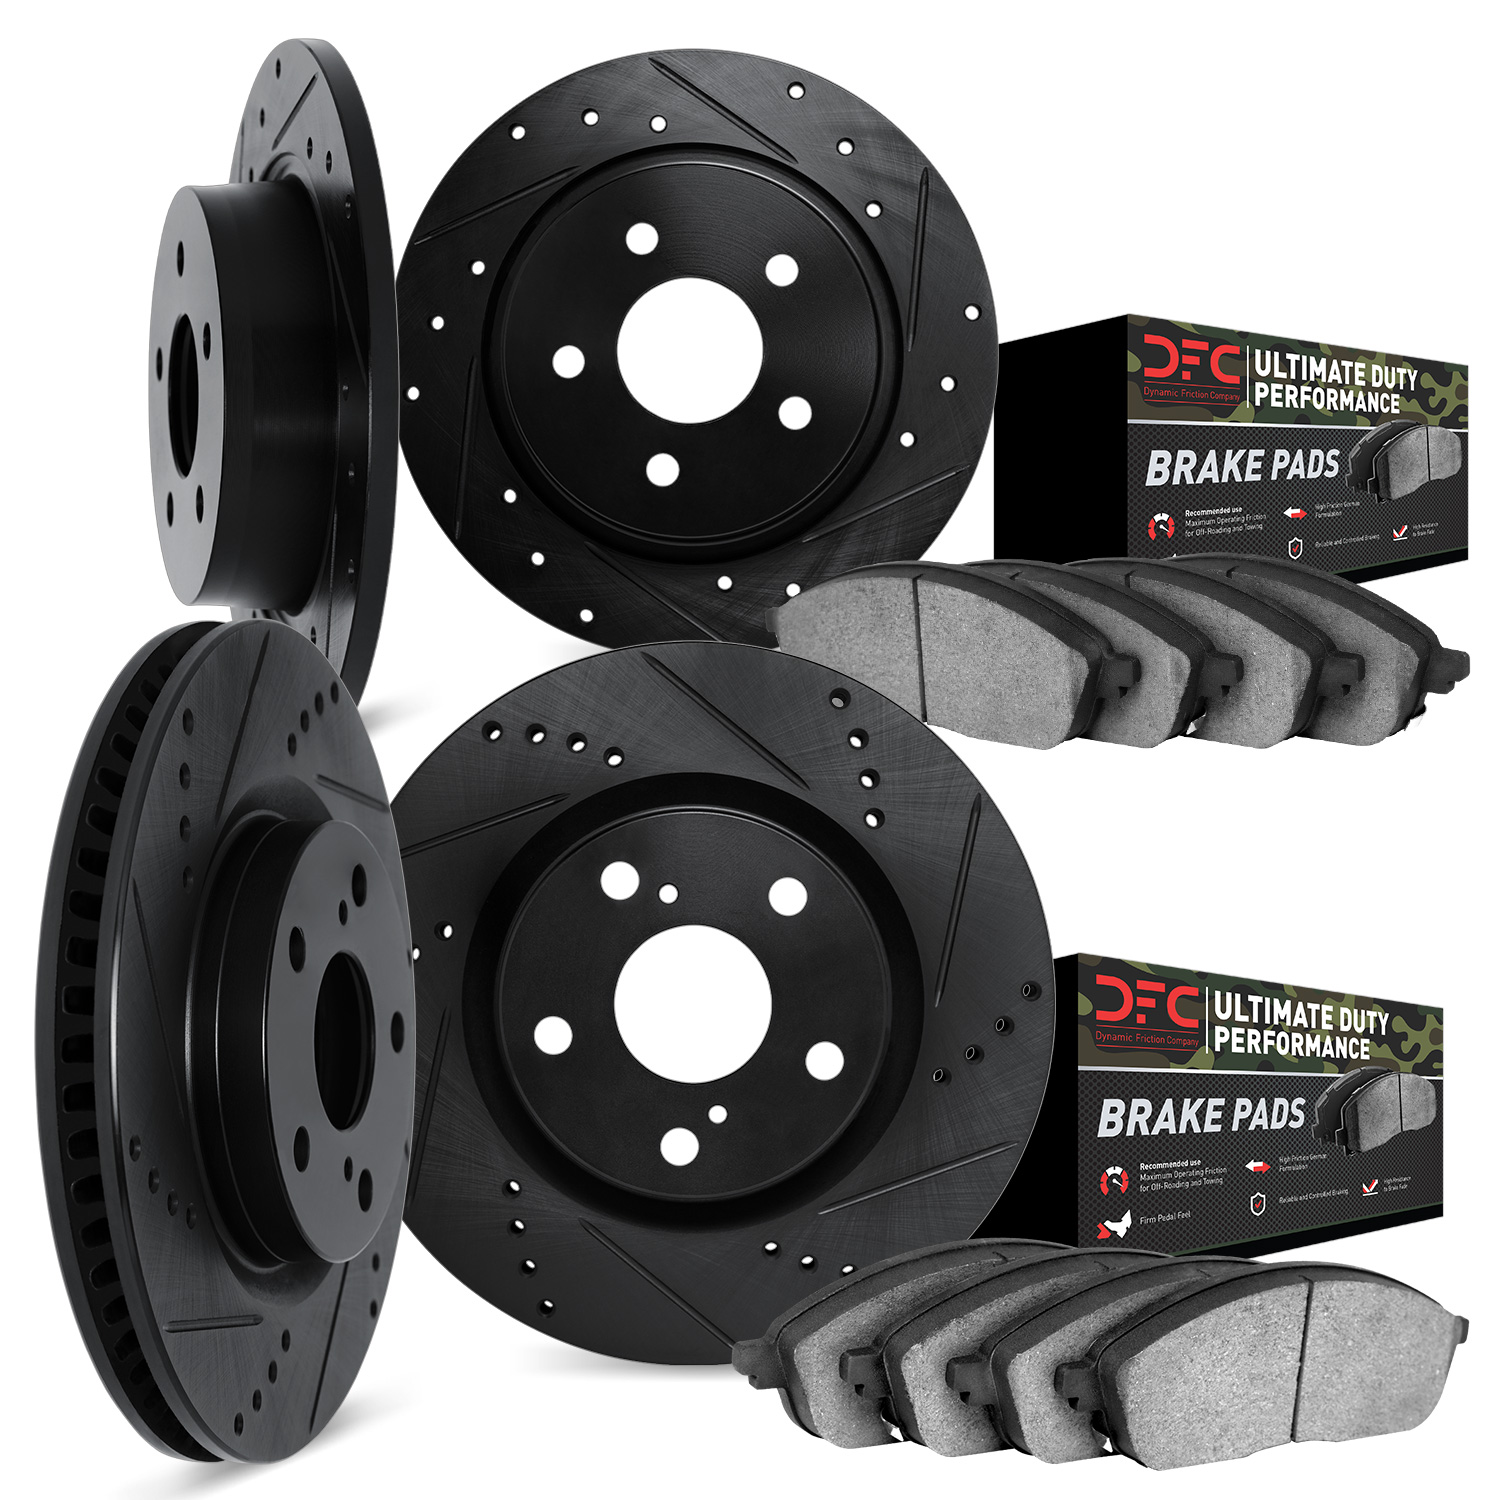 8404-42013 Drilled/Slotted Brake Rotors with Ultimate-Duty Brake Pads Kit [Black], 1999-2002 Mopar, Position: Front and Rear